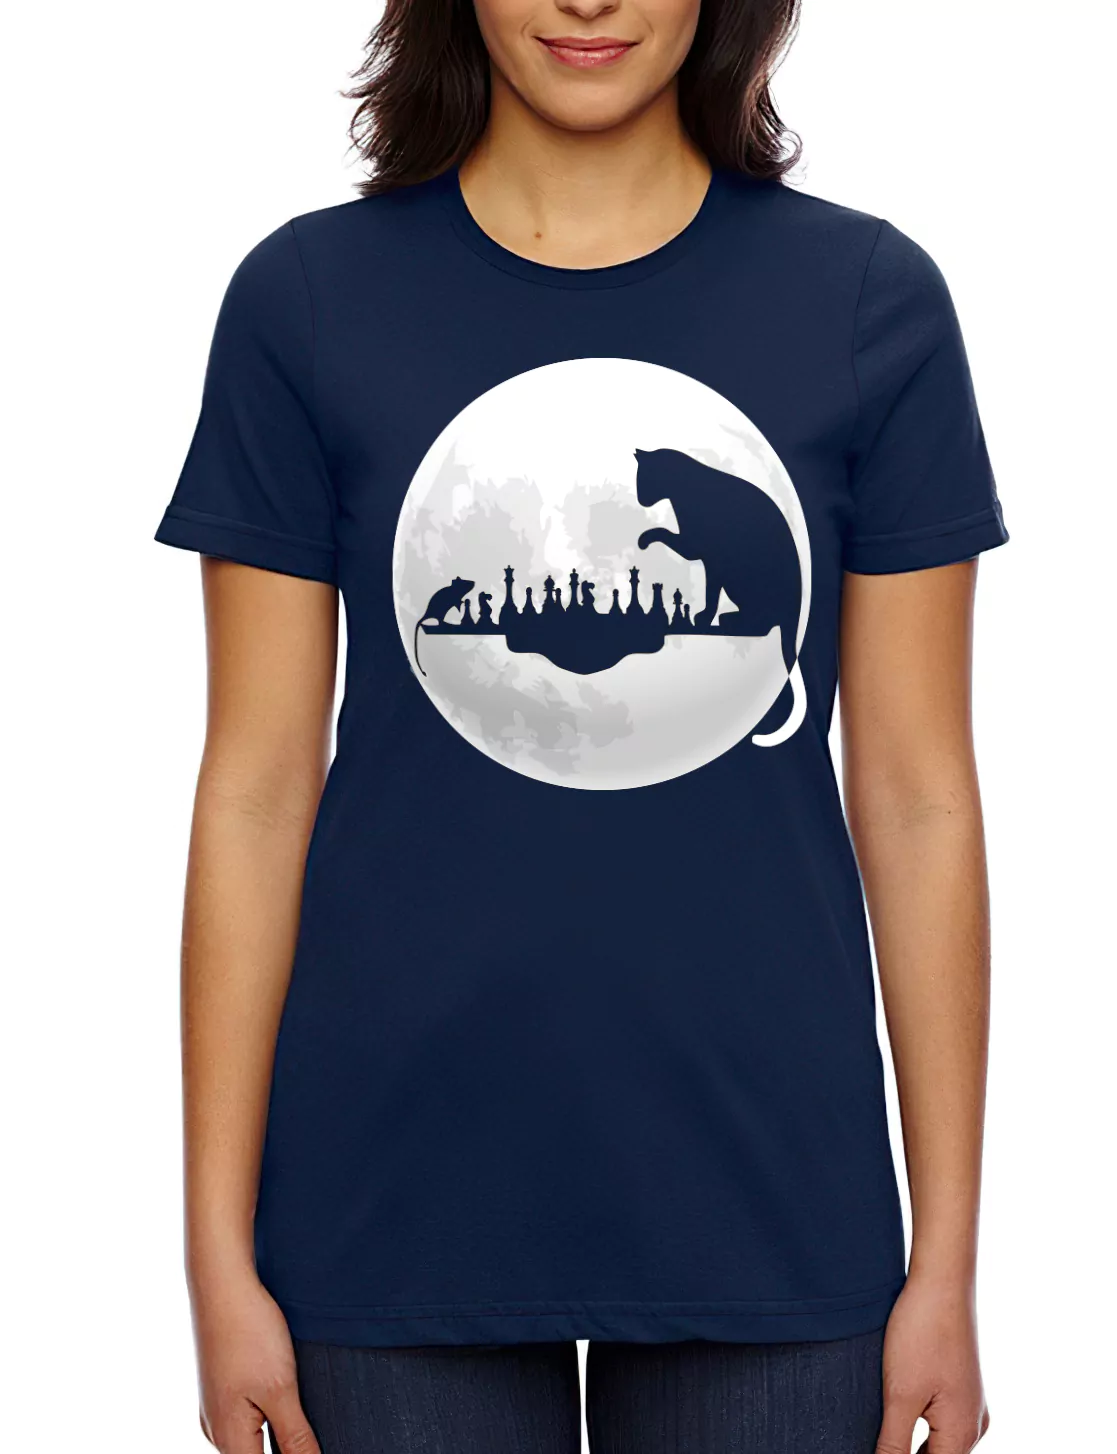 cat playing chess on moon navy blue tshirt for girls